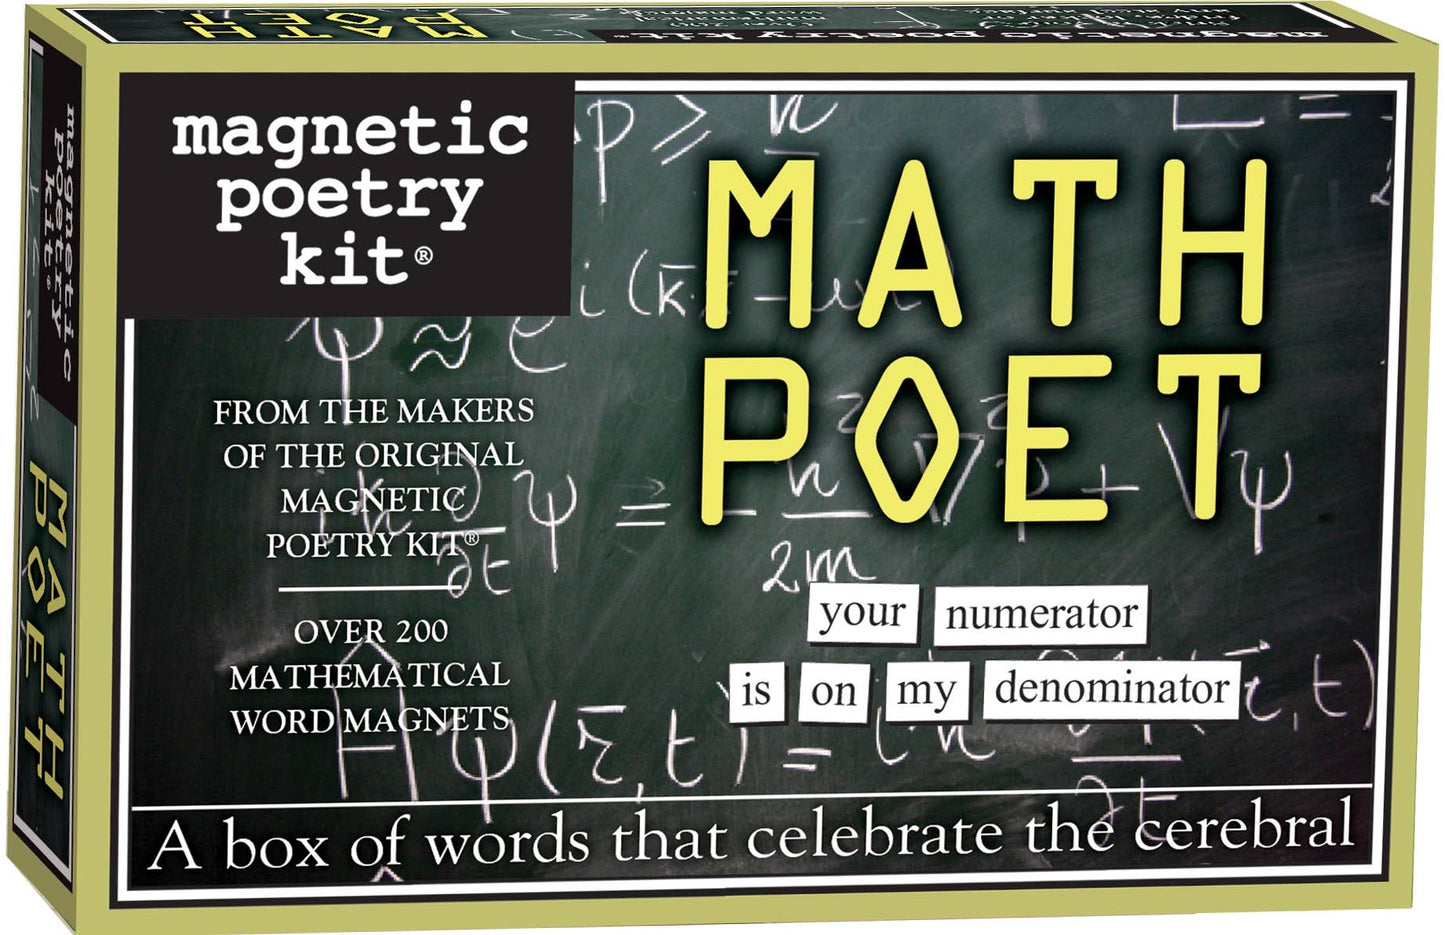 “The Math Poet” Magnetic Poetry Kit - by Magnetic Poetry, Inc - K. A. Artist Shop